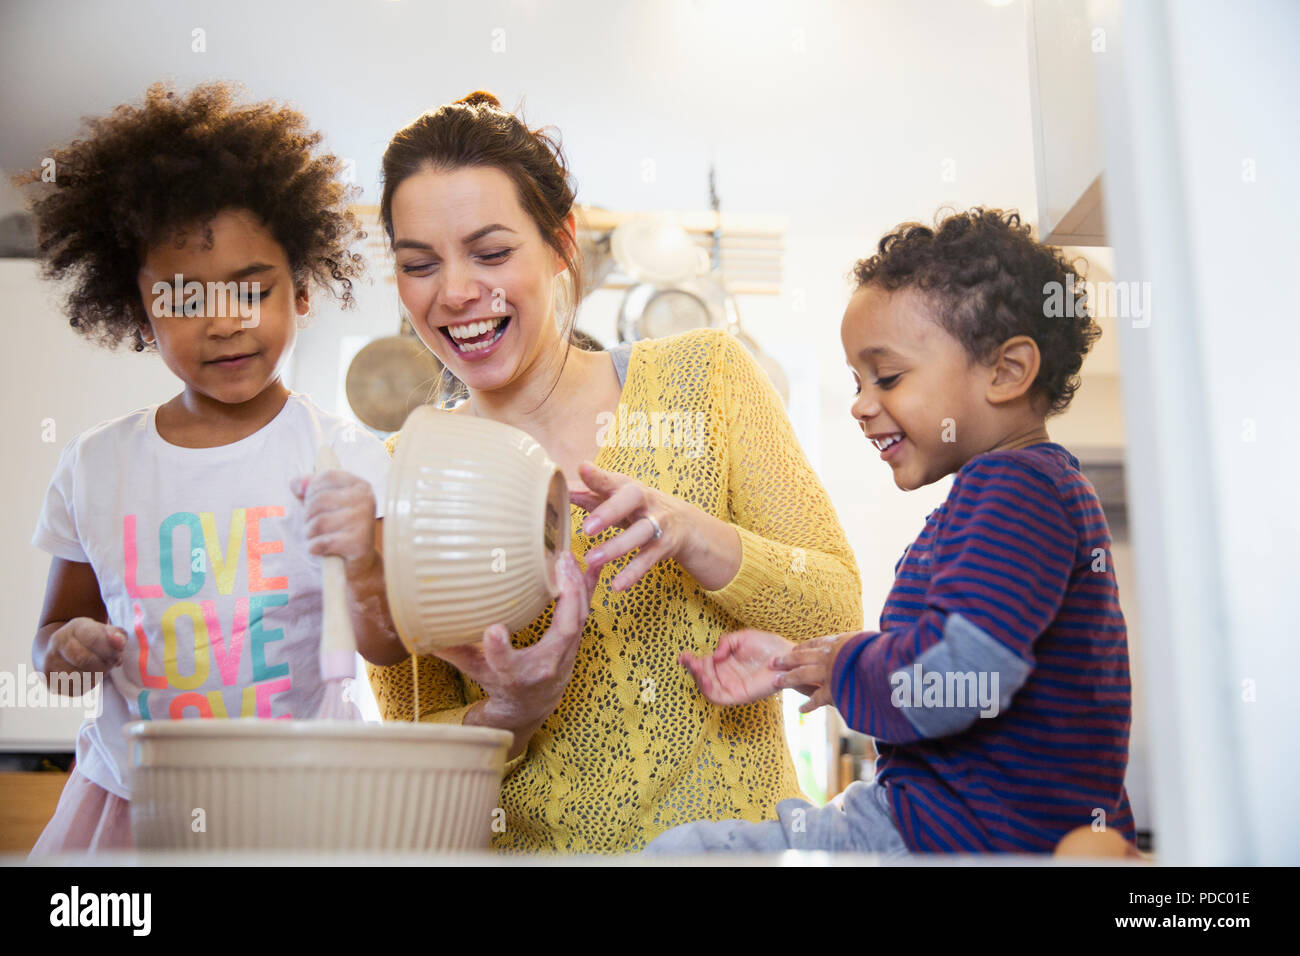 Playful mother and children baking in kitchen Stock Photo